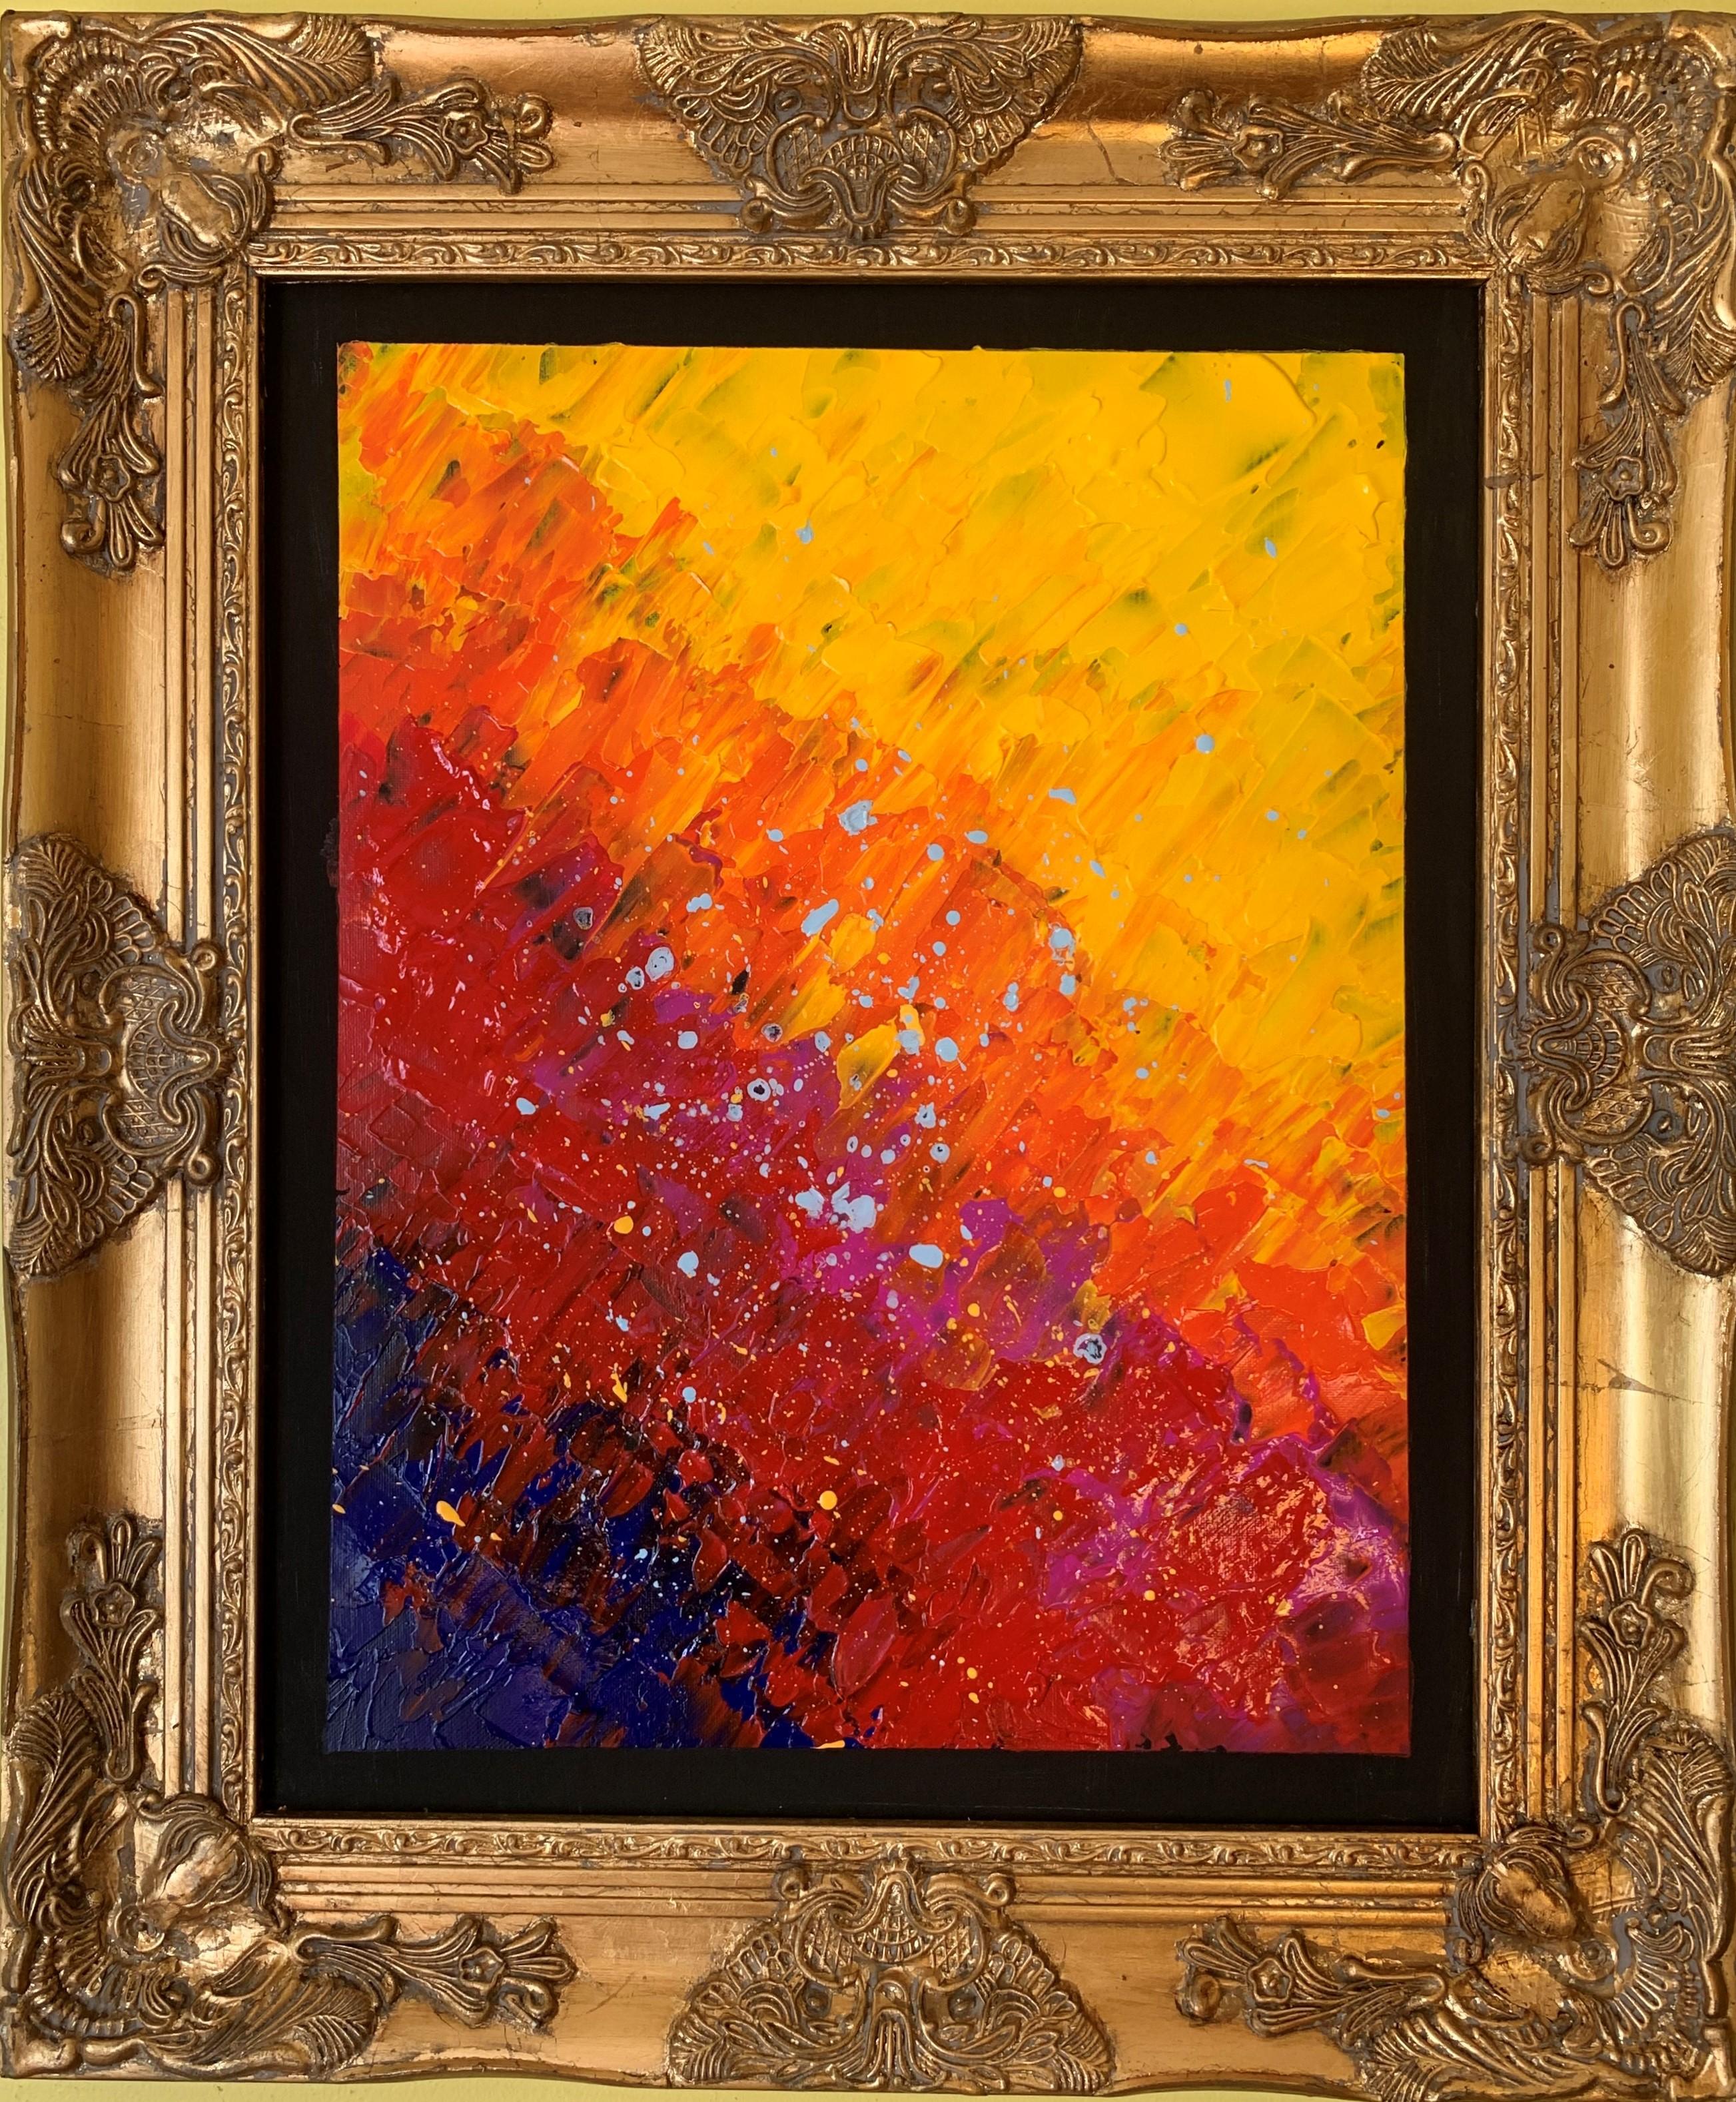 This is an expressive original acrylic painting on canvas in a fantasy abstract style by Alan Nolan (American Artist) Titled "Volcanic Eruption"  Bright colors make this painting very powerful.

Signed and dated on verso. 
Presented in an ornate